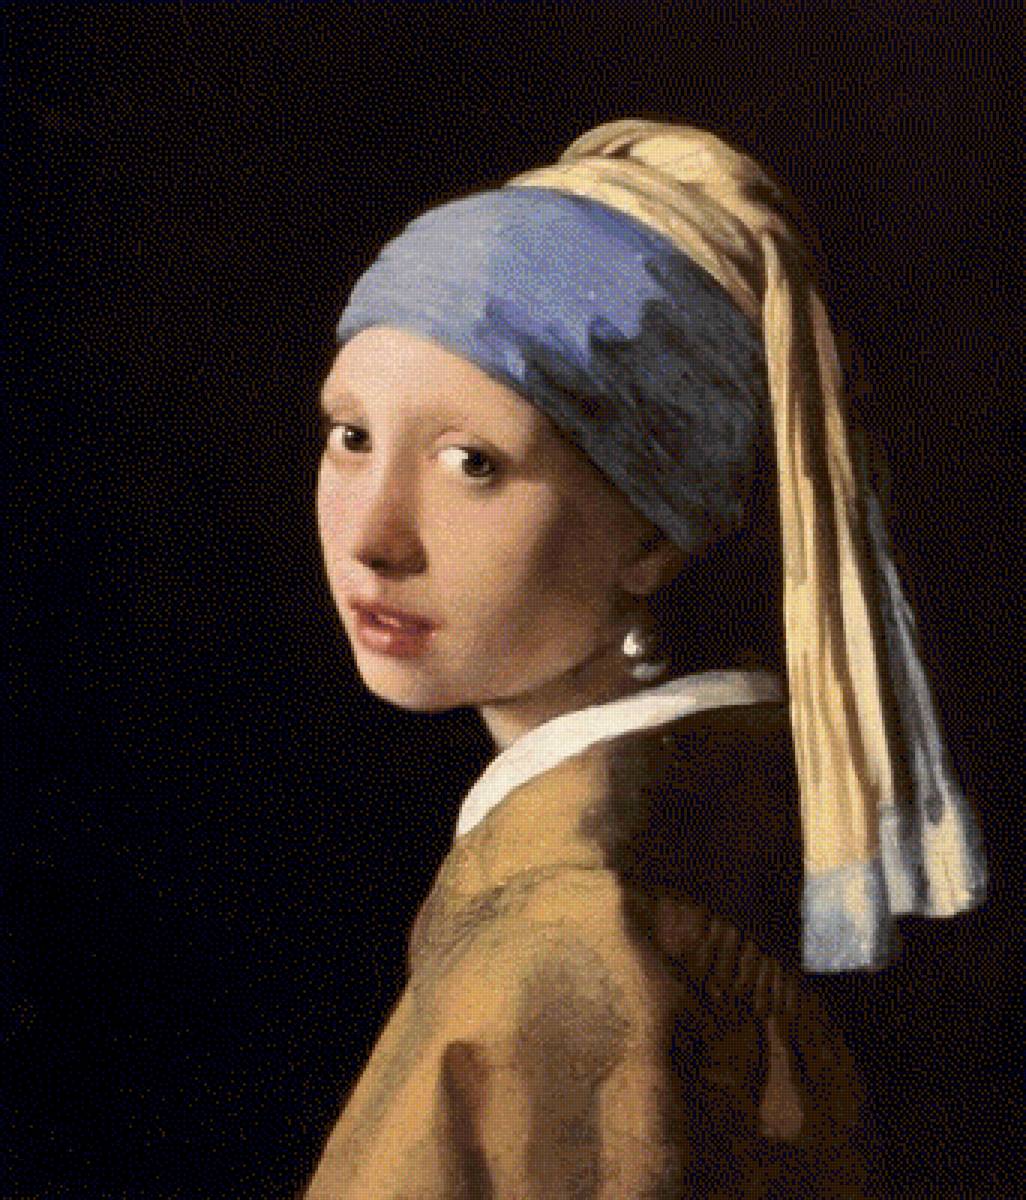 GIRL WITH A PEARL EARRING - JOHANNES VERMEER - girl with a pearl earring - johannes vermeer - предпросмотр